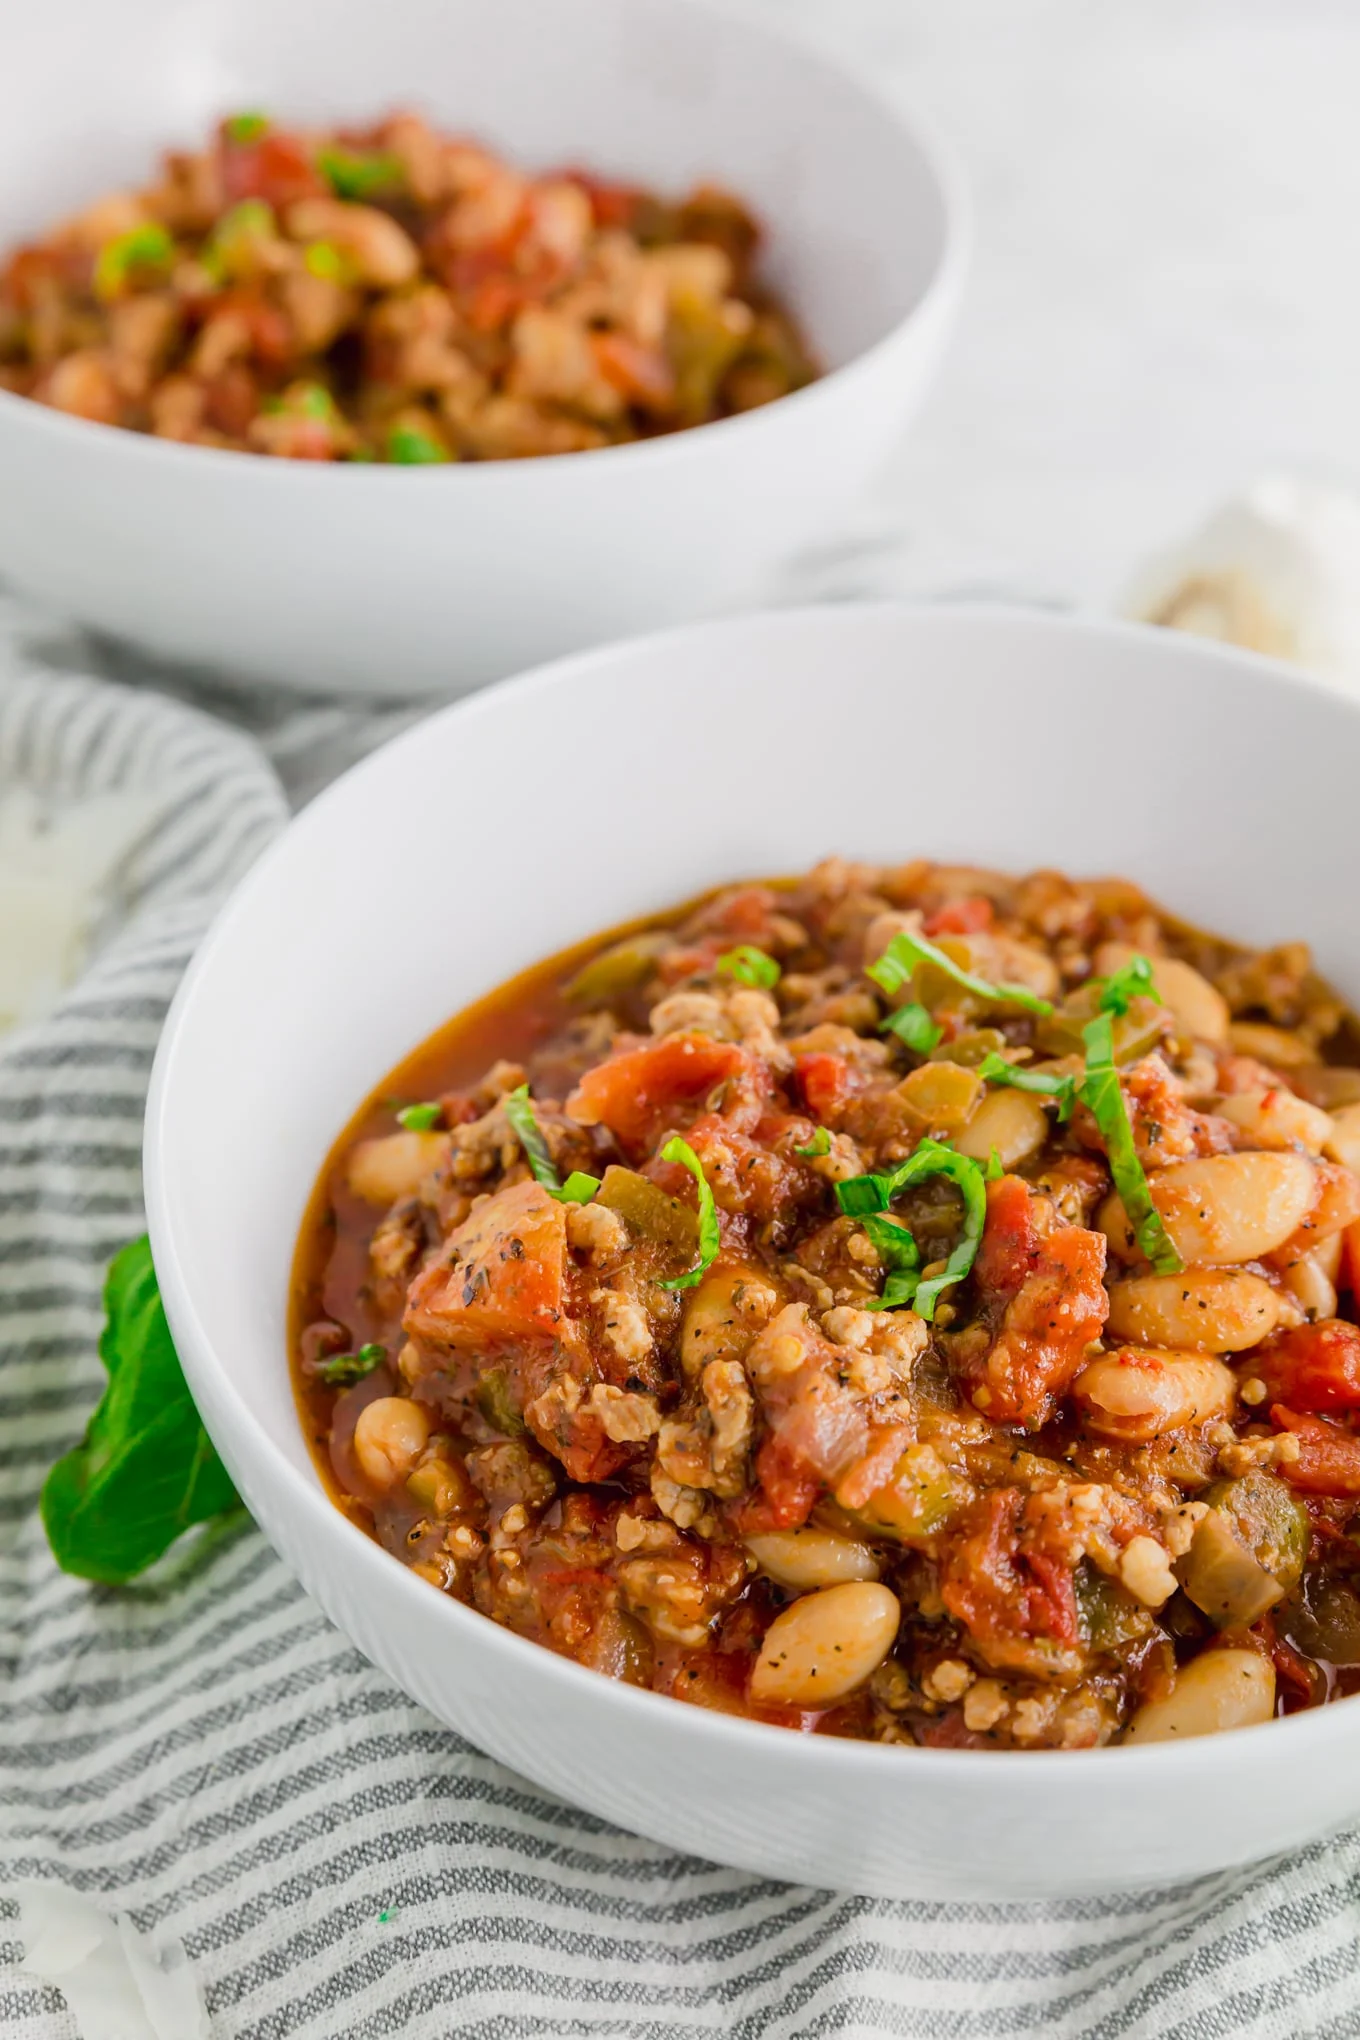 A photo of two bowls of italian sausage stew with white beans topped with fresh basil. / This Italian sausage white bean stew is so easy to make and tastes just like an Italian style chili. It's flavorful and makes for great leftovers! Naturally gluten-free, this stew is great for meal prep or serving guests for a dinner party. Italian sausage white bean stew is hearty, meaty and delicious - perfect for cold winter days. Serve with parmesan cheese and some crusty gluten-free bread. It's ready in 30 minutes when you need a quick weeknight meal! #recipe #glutenfree
